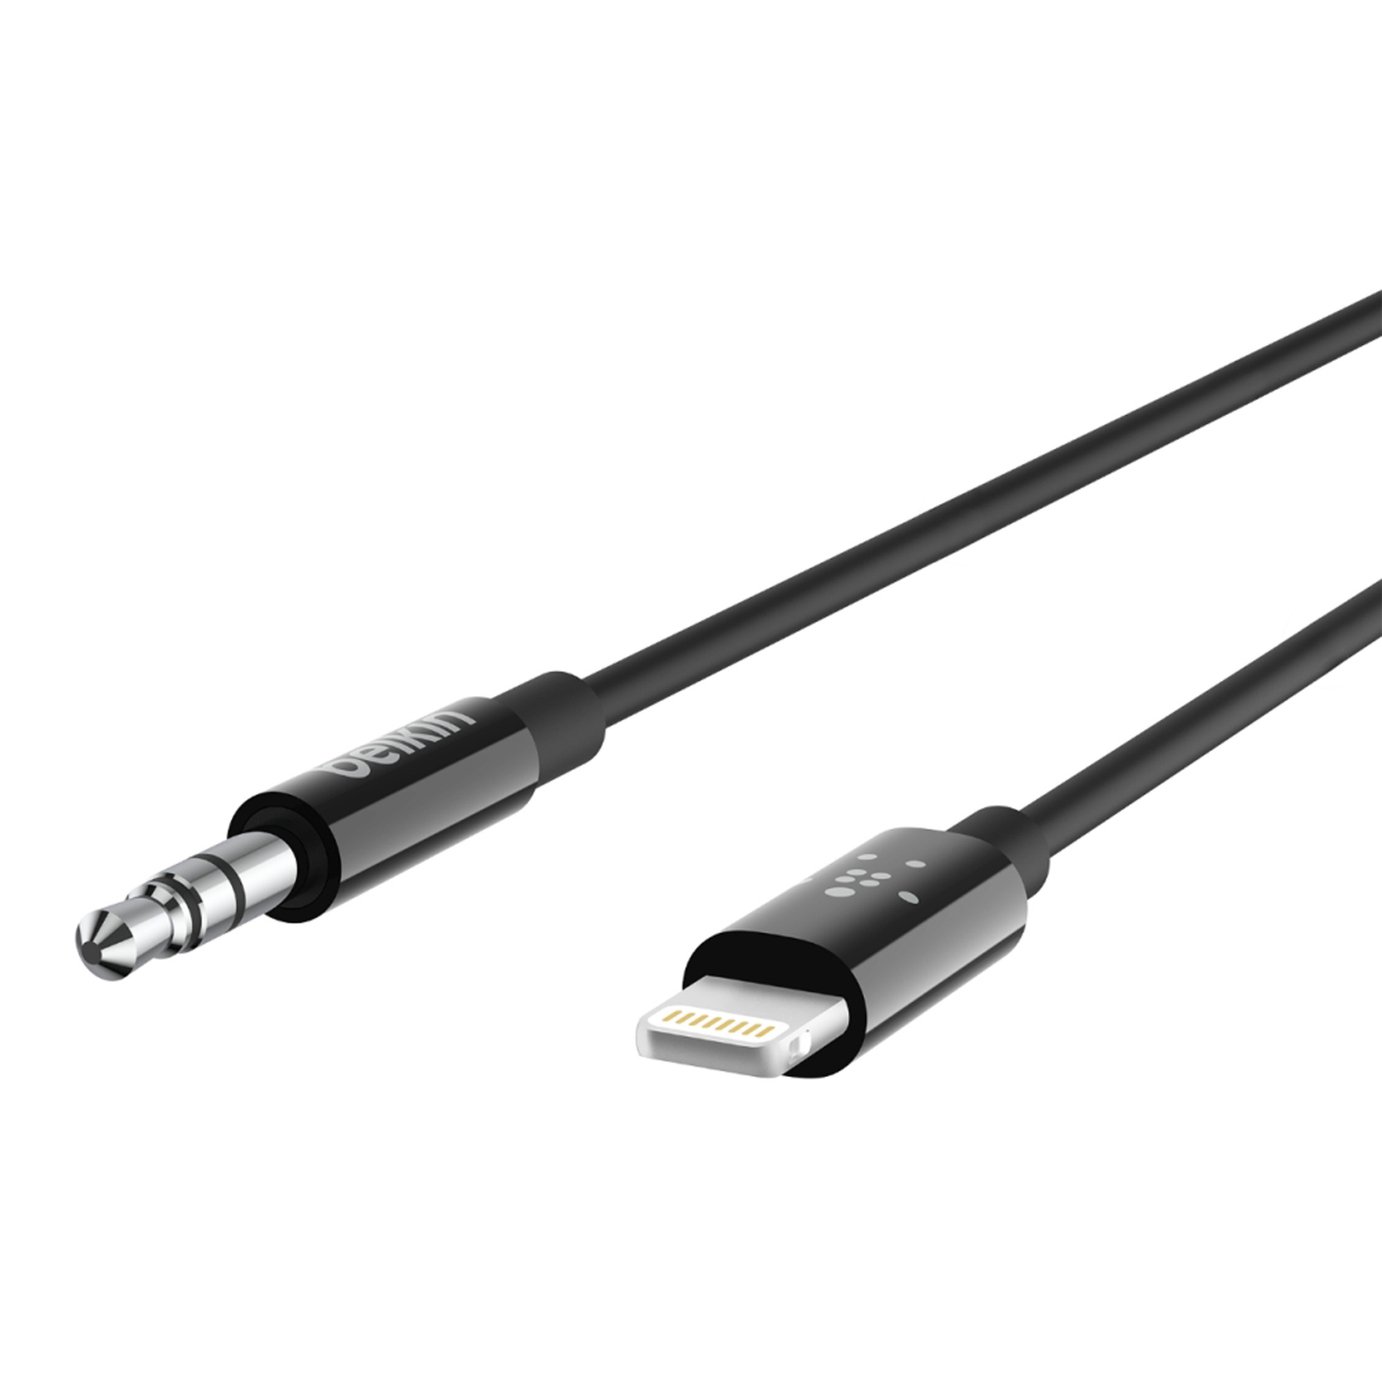 Belkin 3.5 mm Audio Cable With Lightning Connector Review